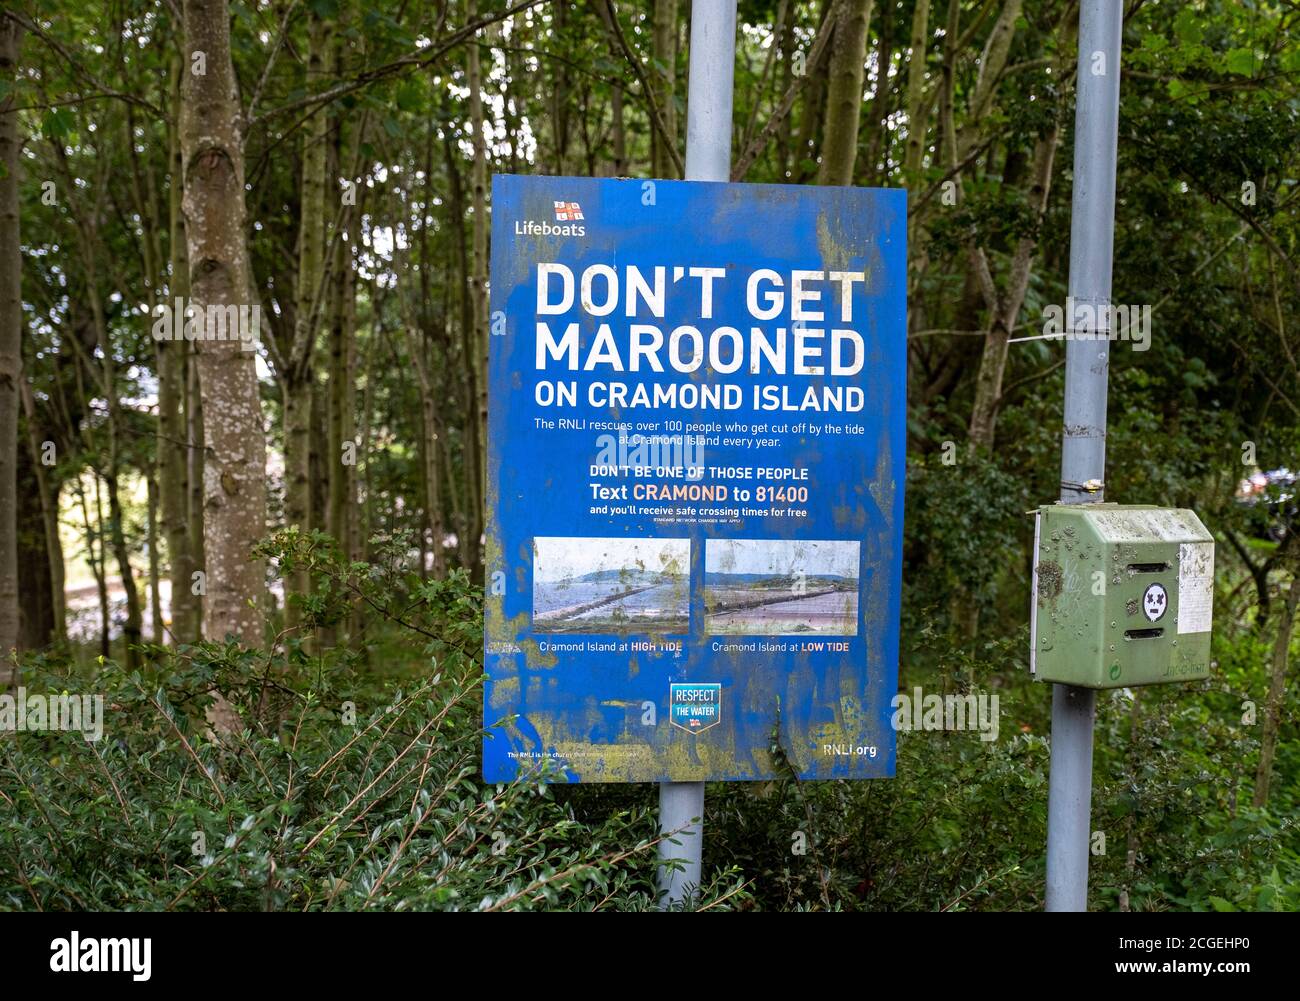 Sign at Cramond village car park Edinburgh, warning of the danger of getting marooned on Cramond Island in the Firth of Forth. Stock Photo